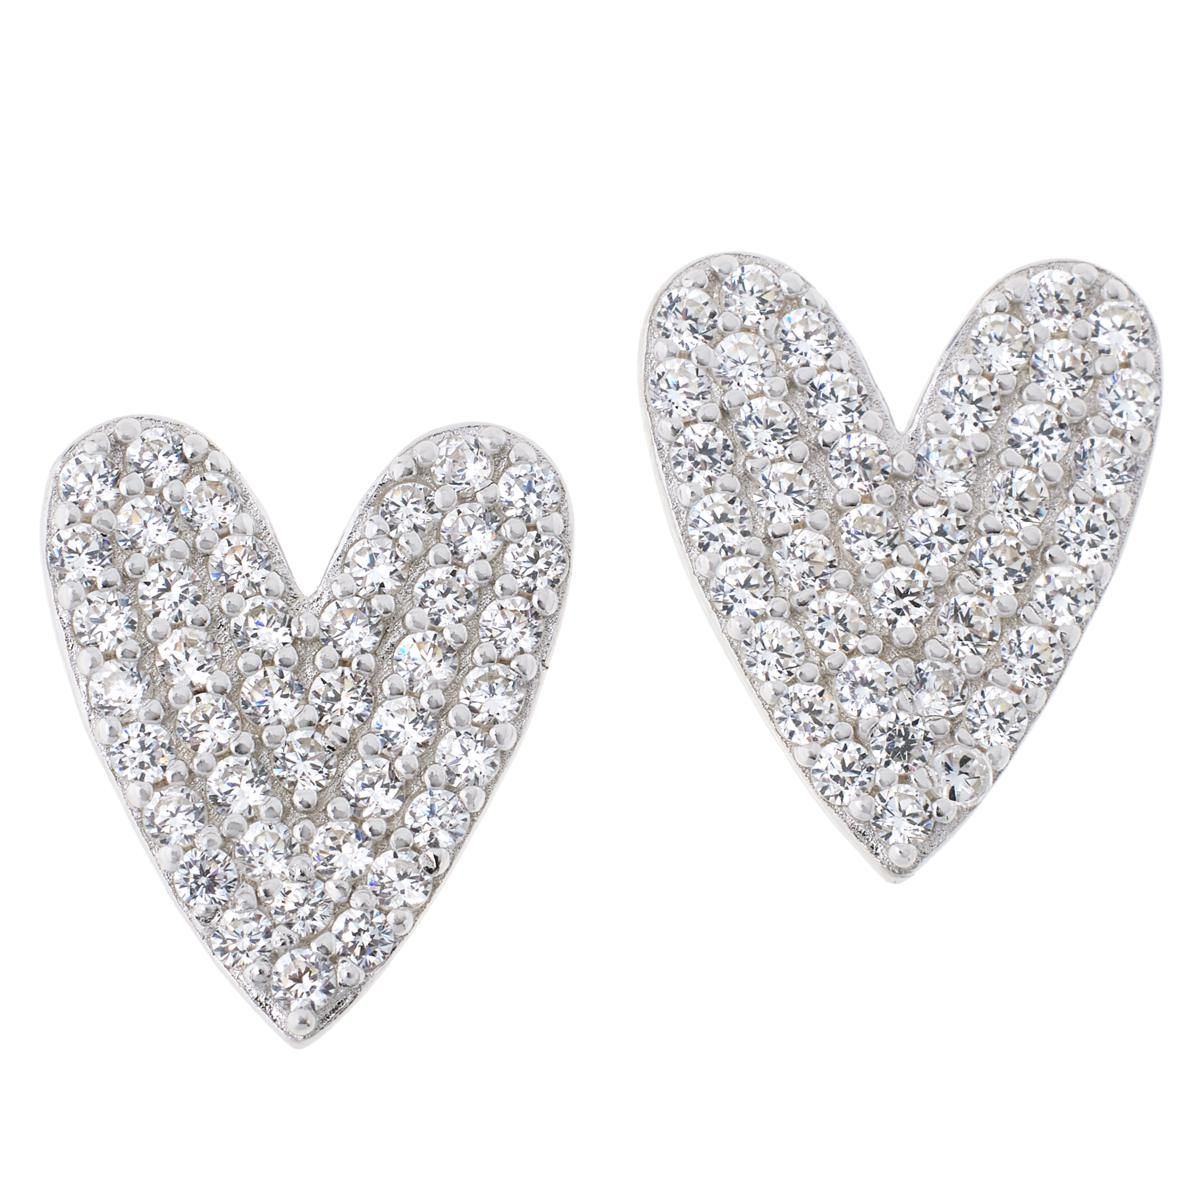 Radiance by Absolute™1.06ctw Pavé Heart Stud Earrings | HSN